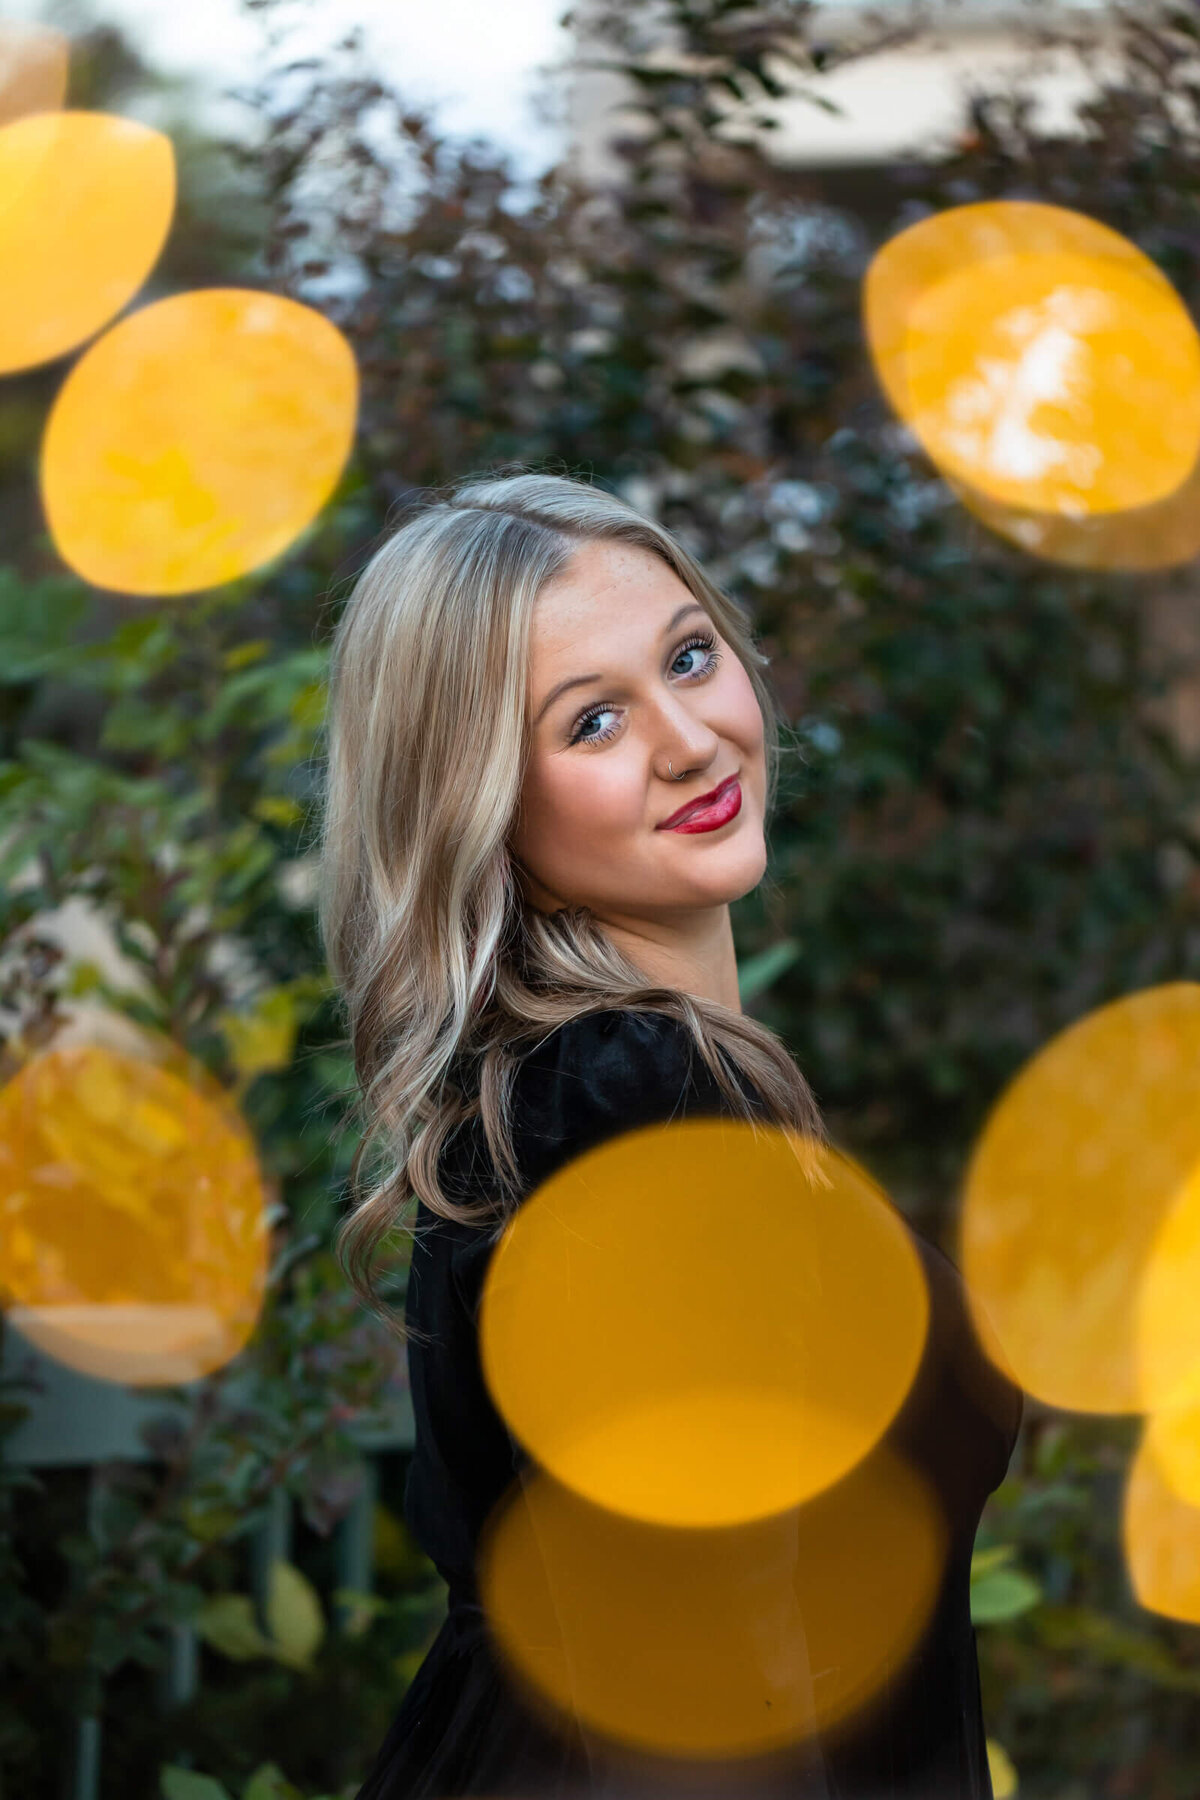 A unique and fun senior portrait of a blonde teen girl wearing a black dress is framed by golden light orbs. Captured by Springfield MO photographer Dynae Levingston